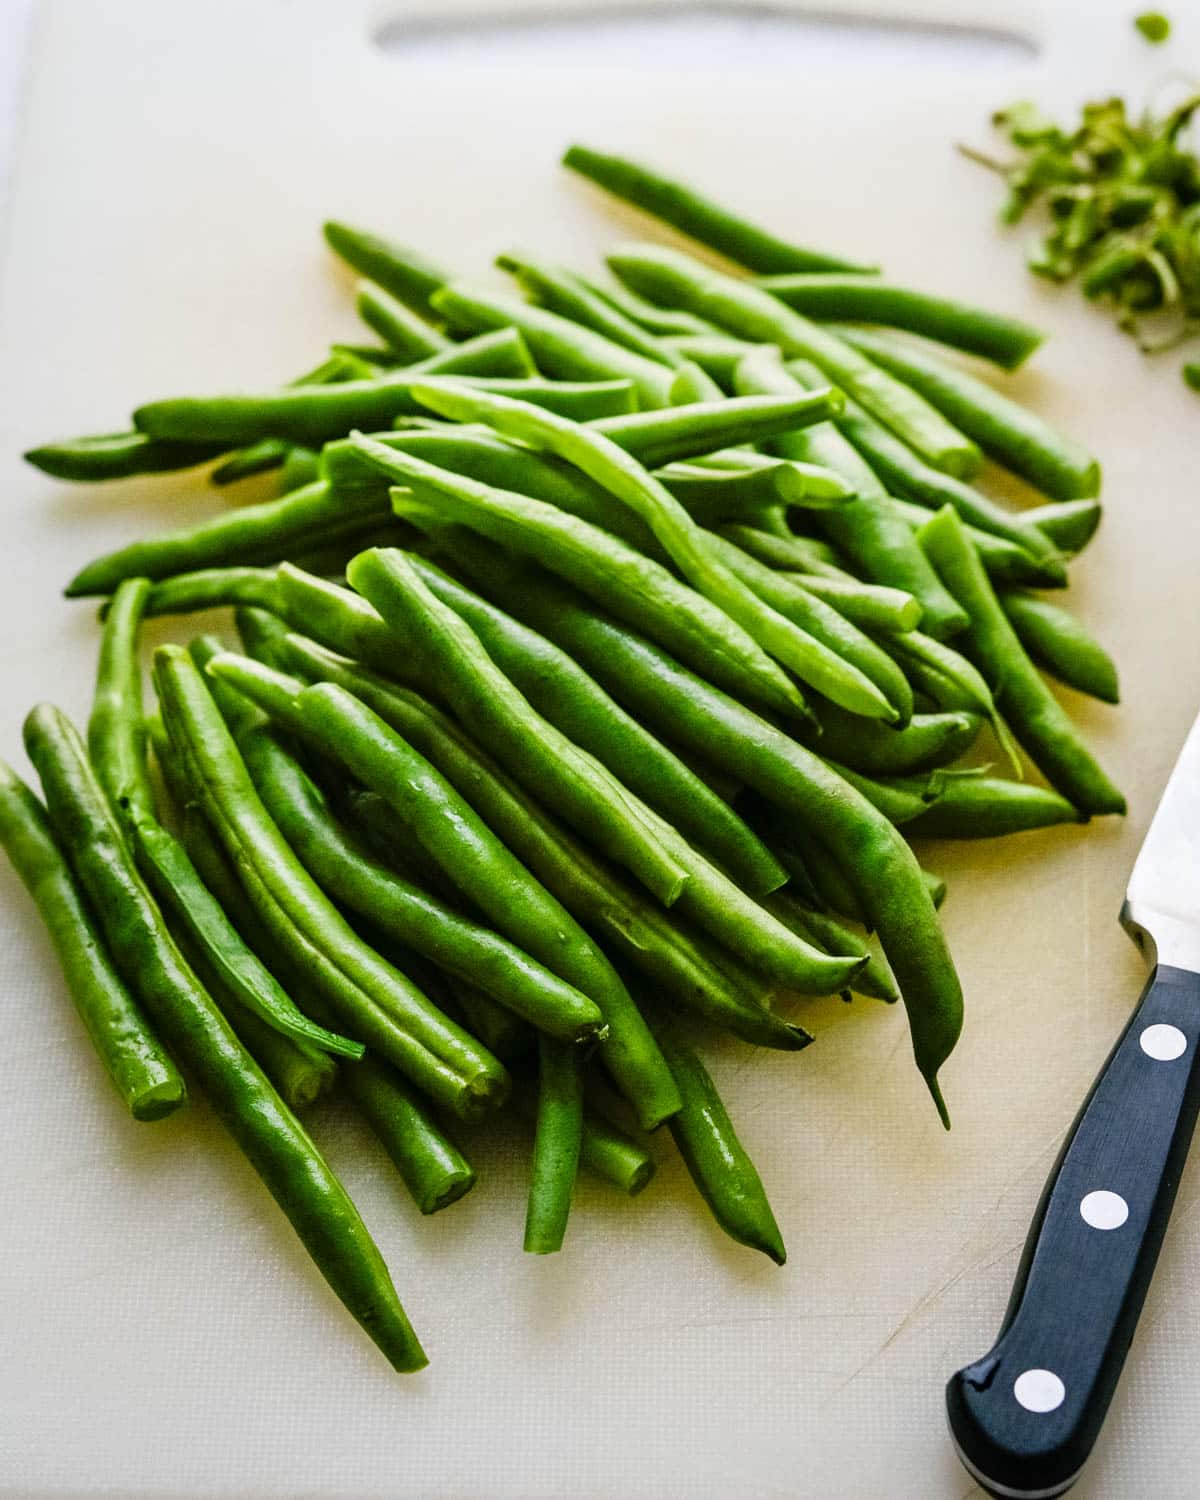 Trim the ends of the French green beans.